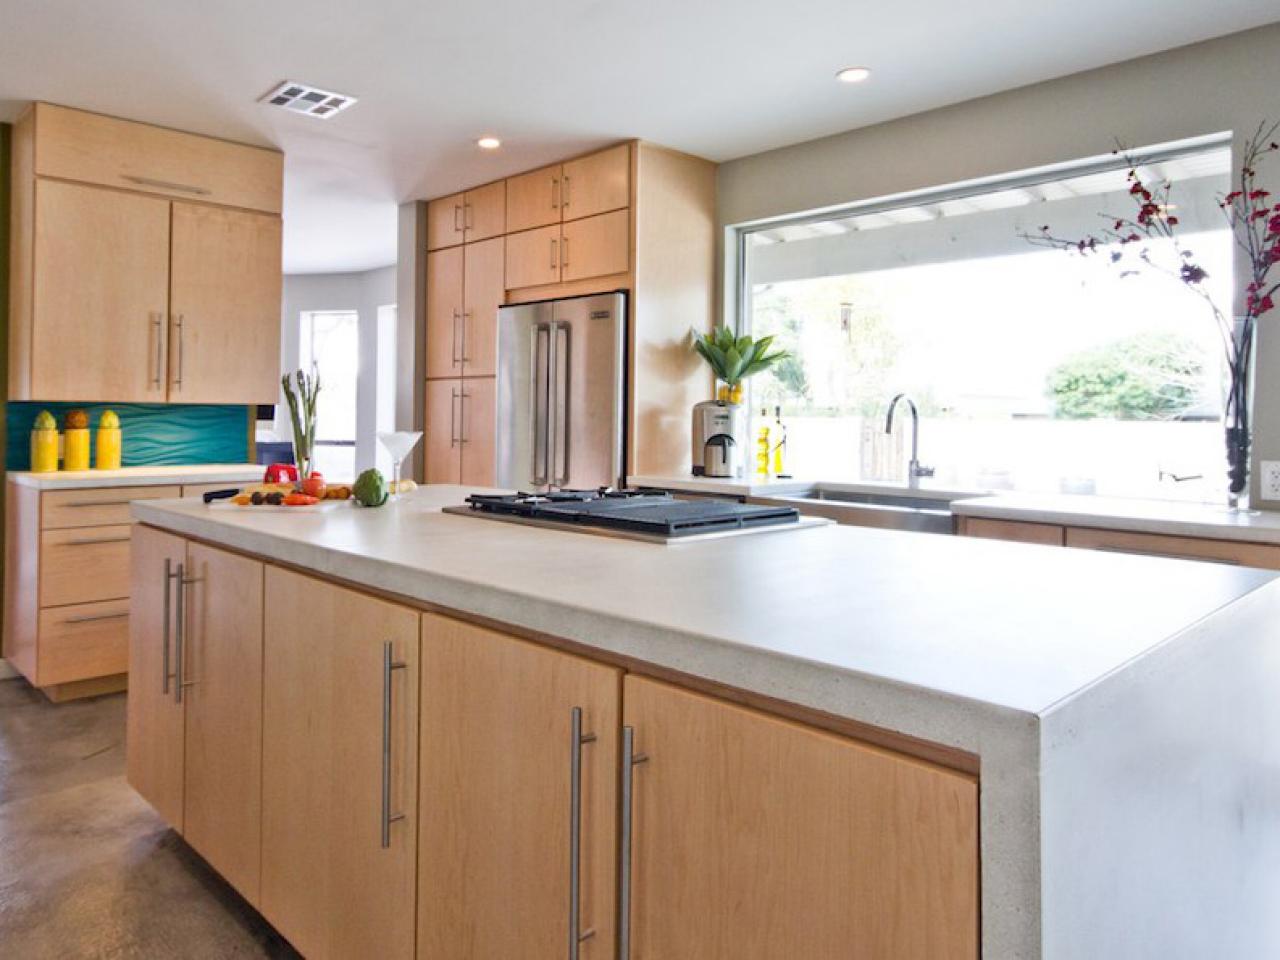 Concrete Kitchen Countertops Pictures Ideas From HGTV HGTV